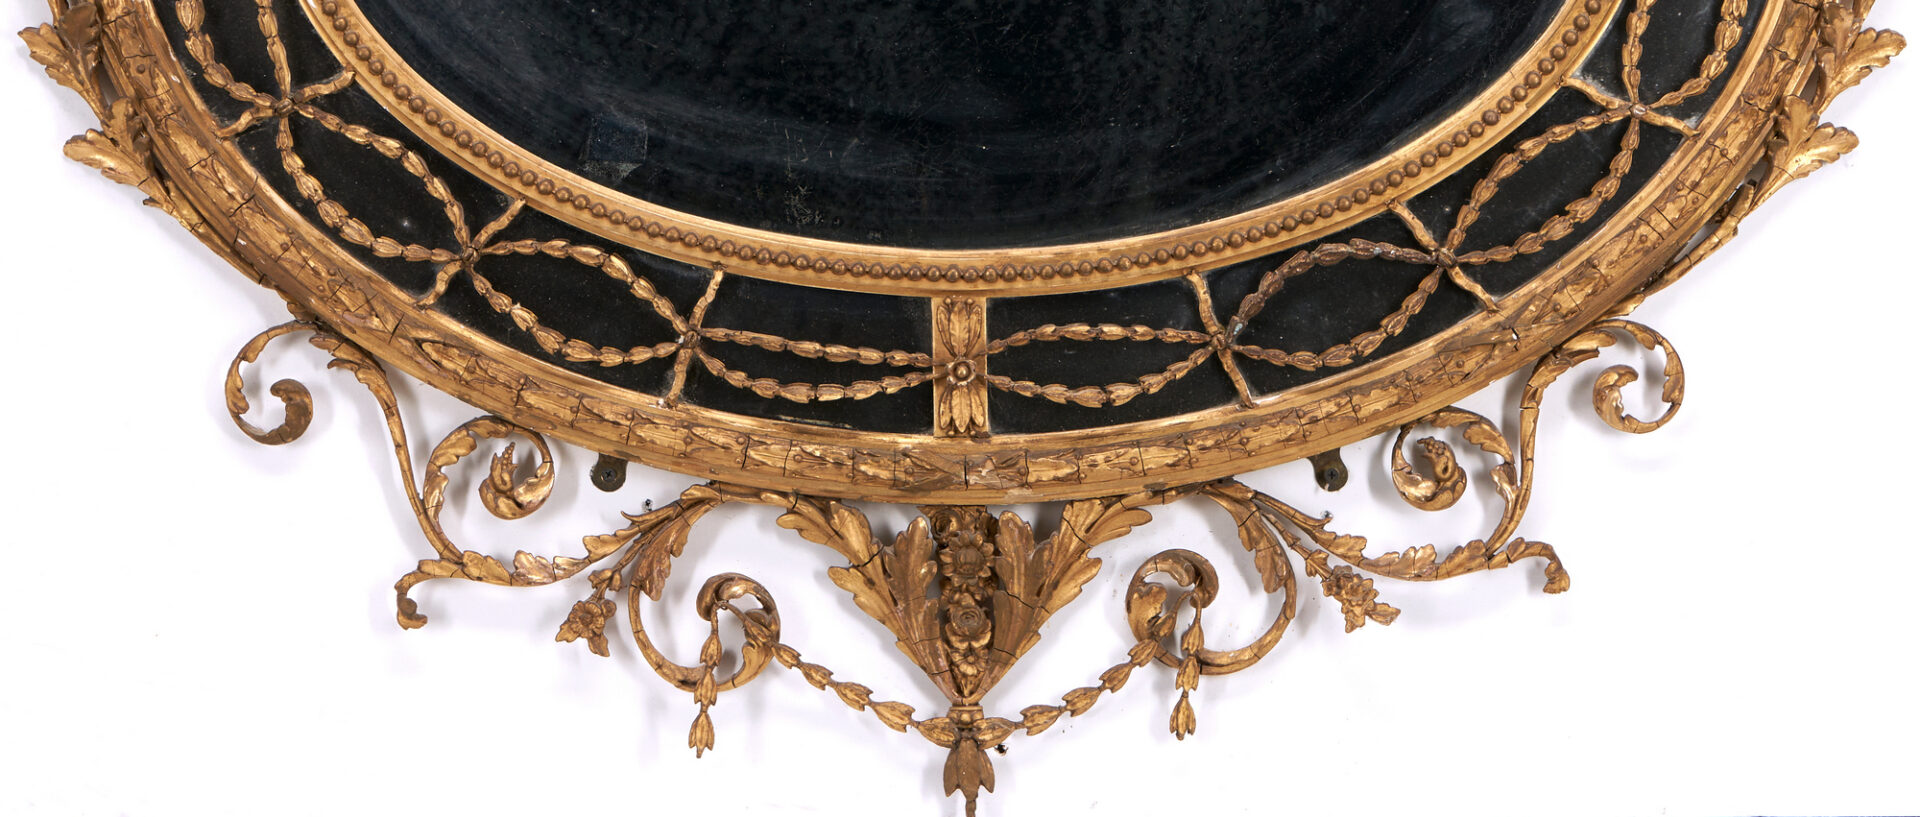 Lot 247: George III Neoclassical Oval Giltwood Mirror with Candle Brackets